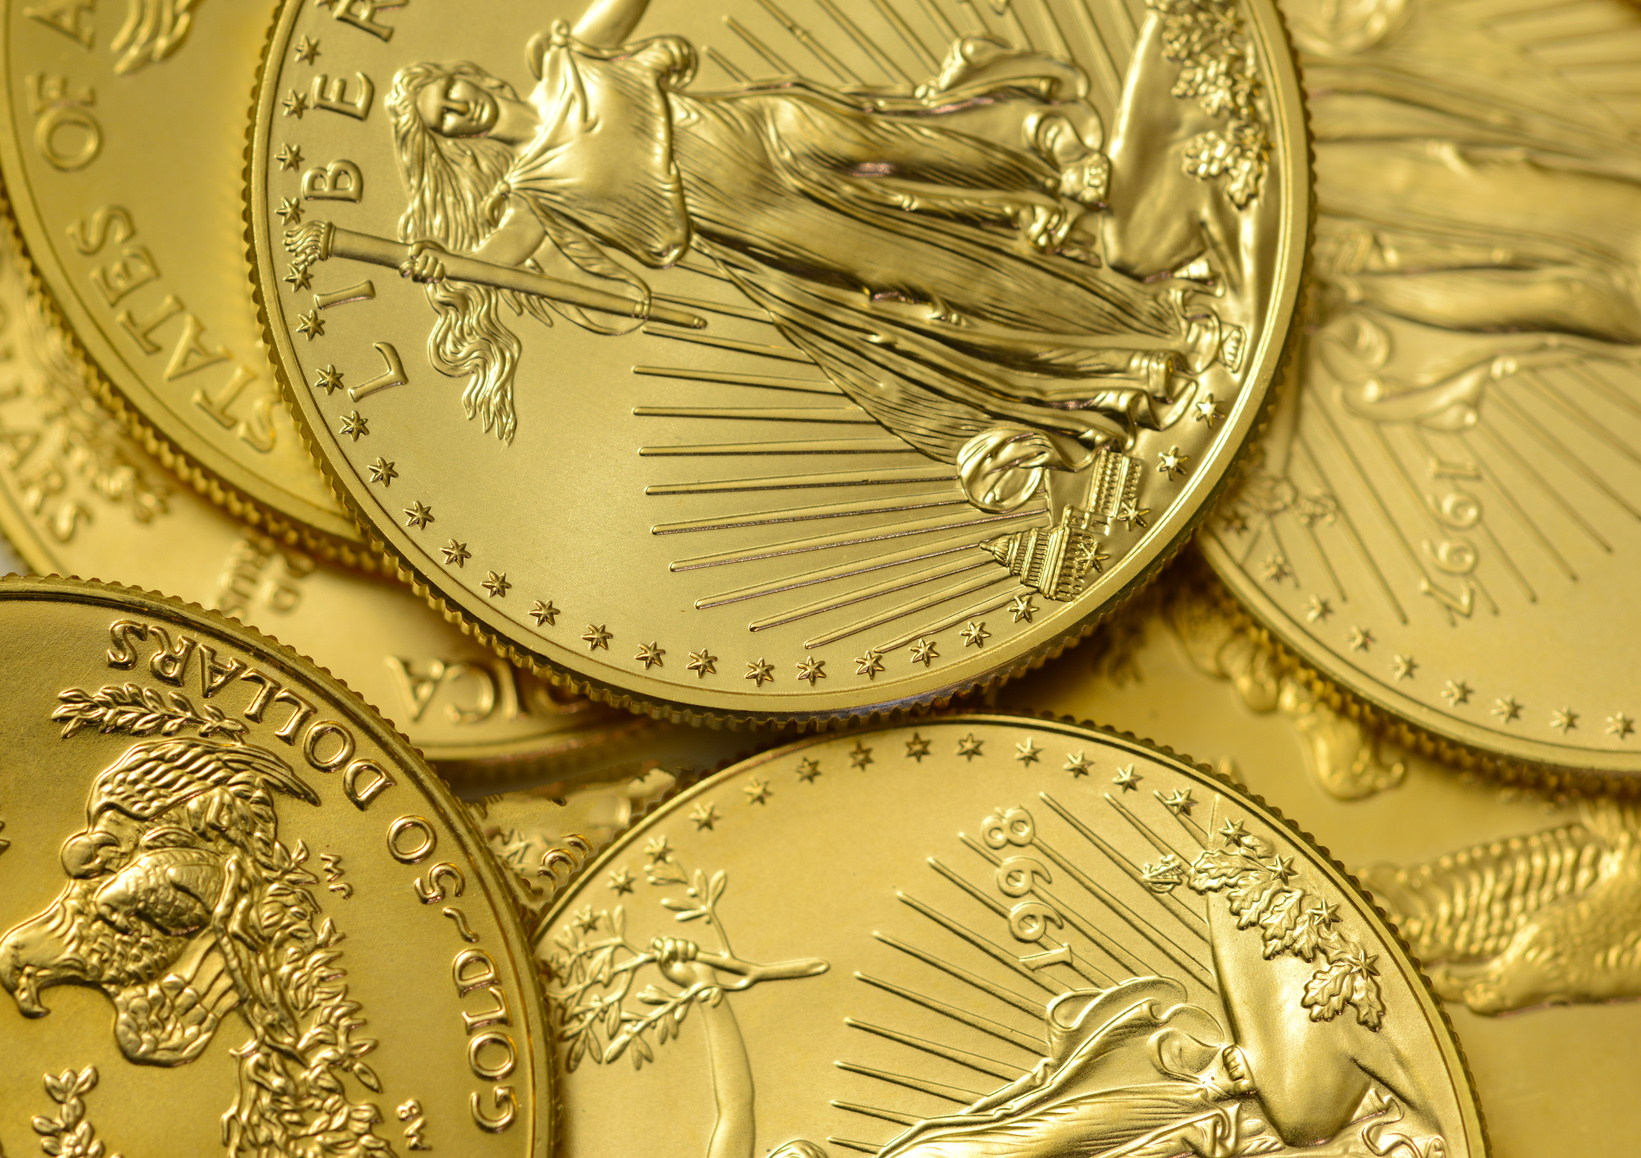 Gold coins, a rare precious metal to geologists and chemists and a symbol of value for economists and the worlds banks